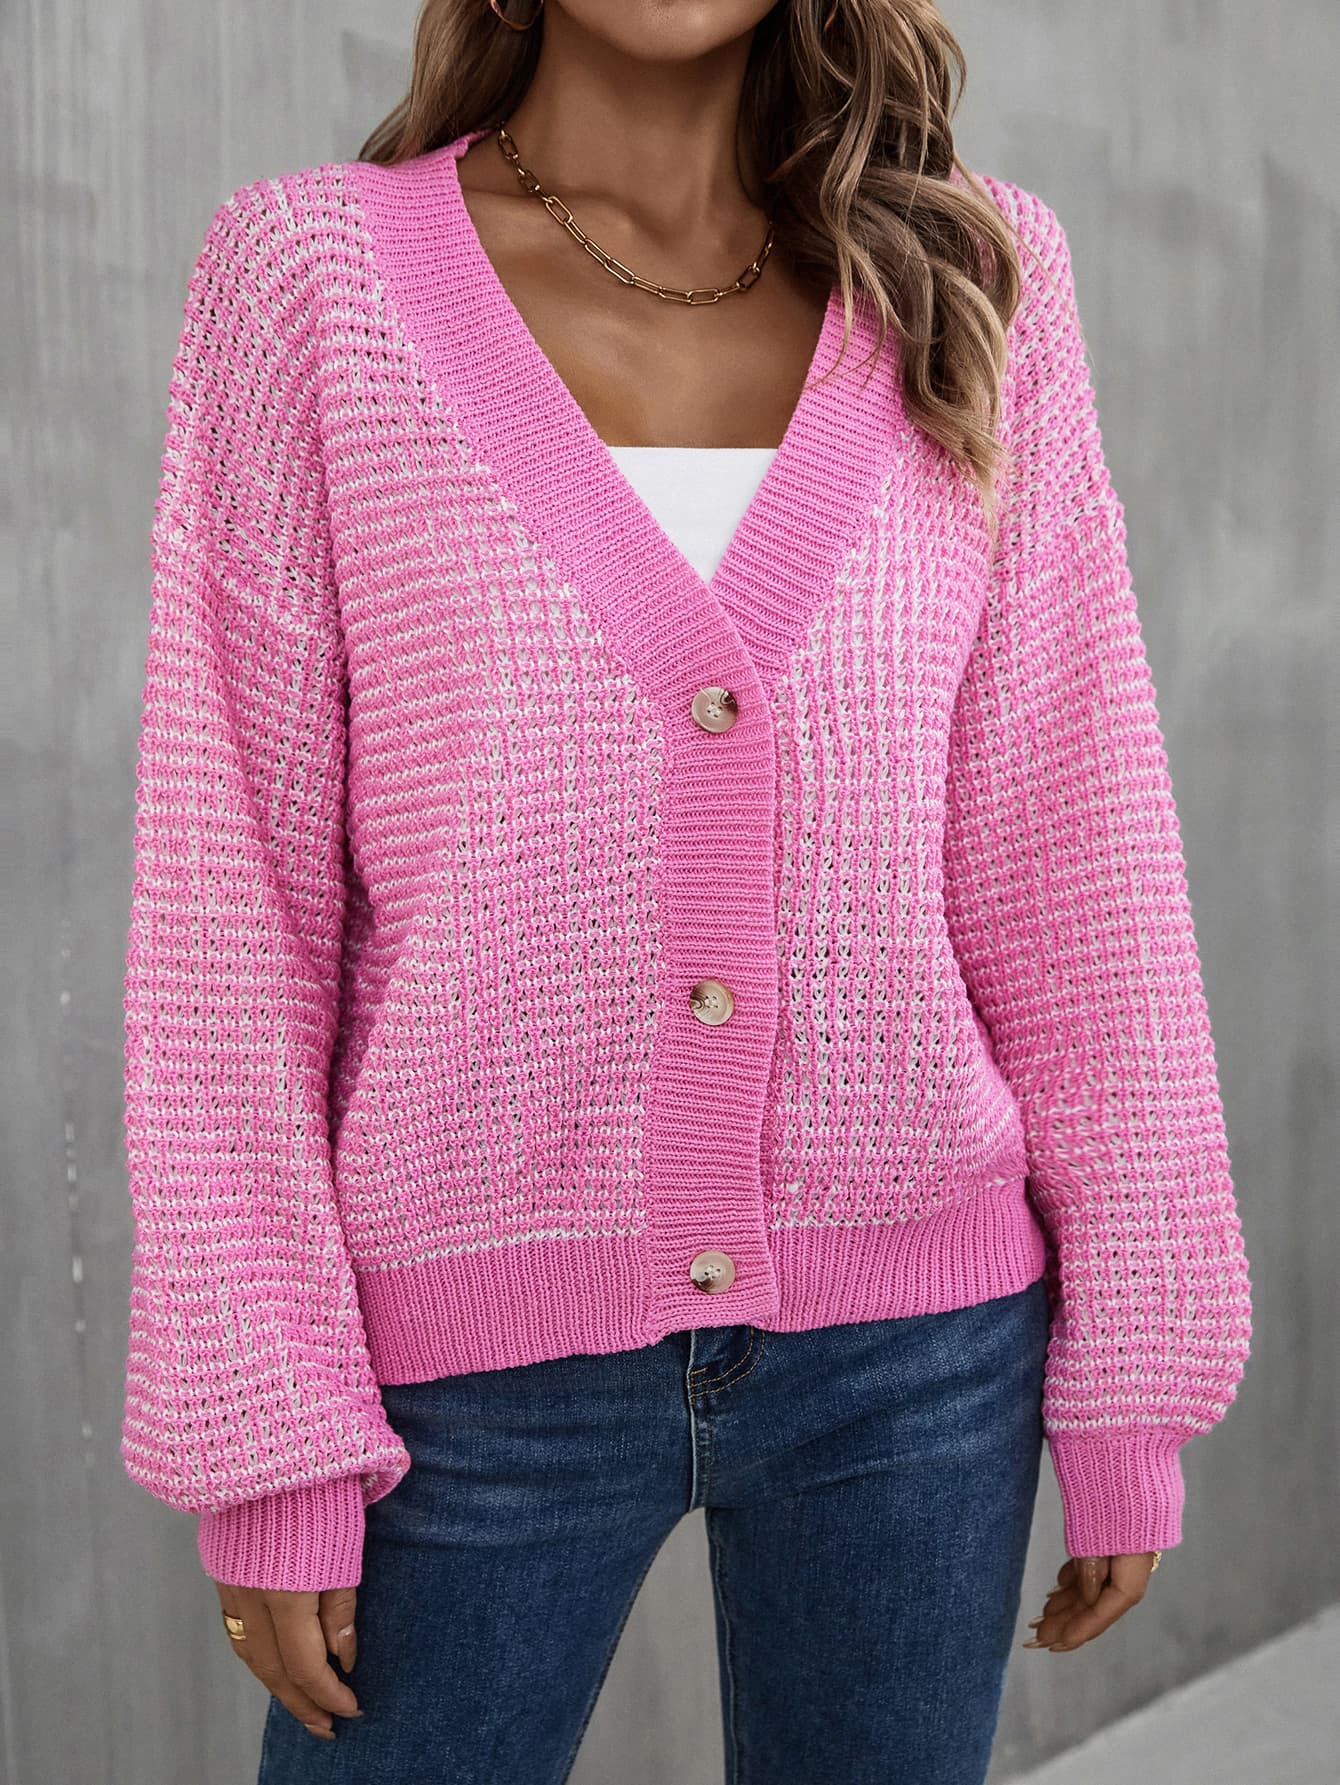 V-Neck Dropped Shoulder Cardigan - Women’s Clothing & Accessories - Shirts & Tops - 8 - 2024